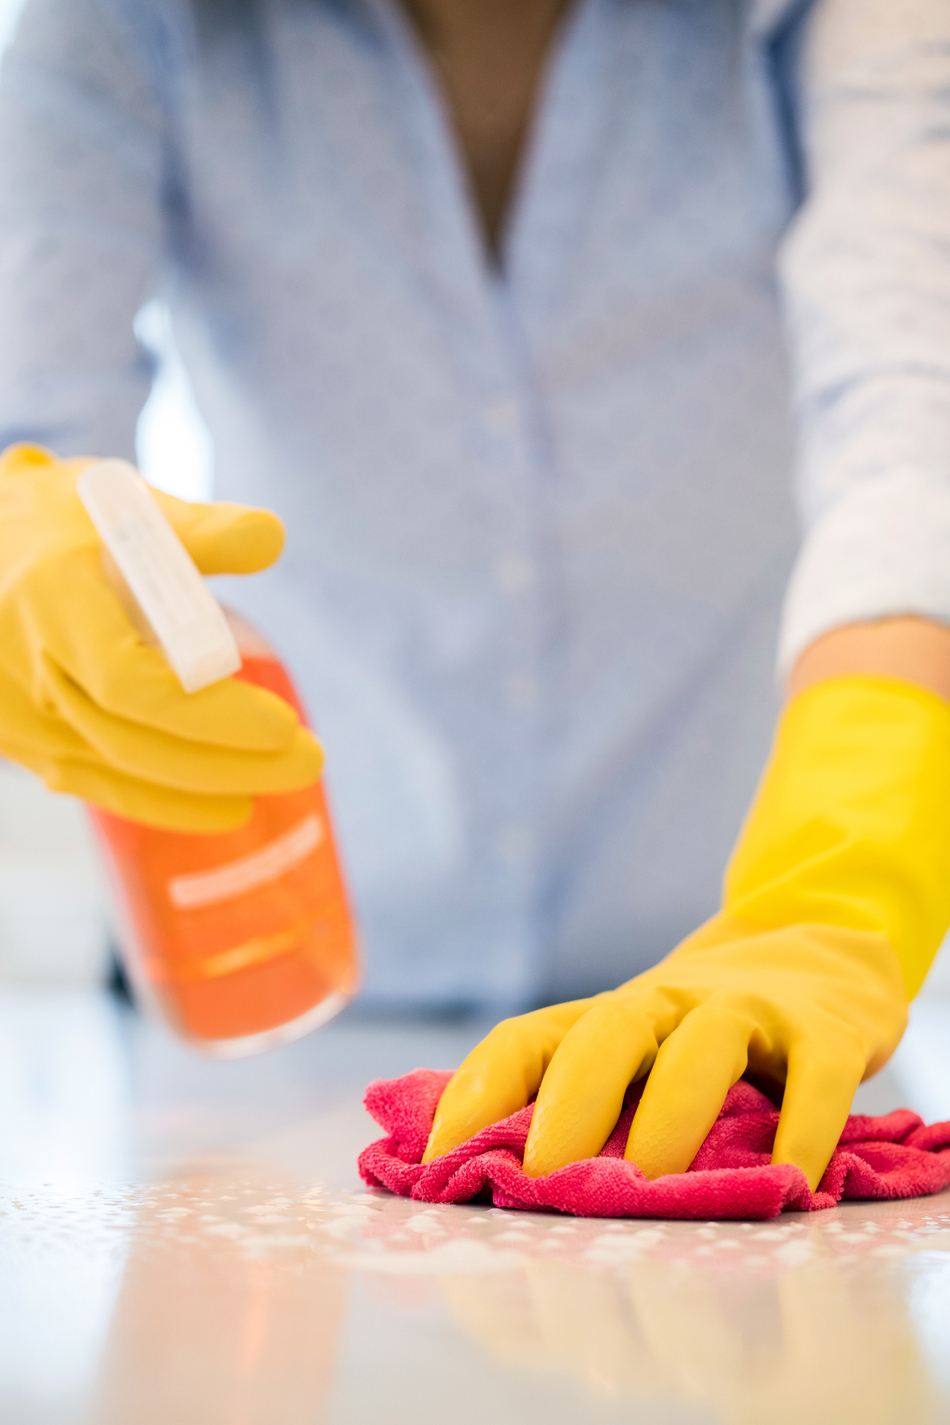 Cleaning Your Home (the Safe Way) During COVID-19